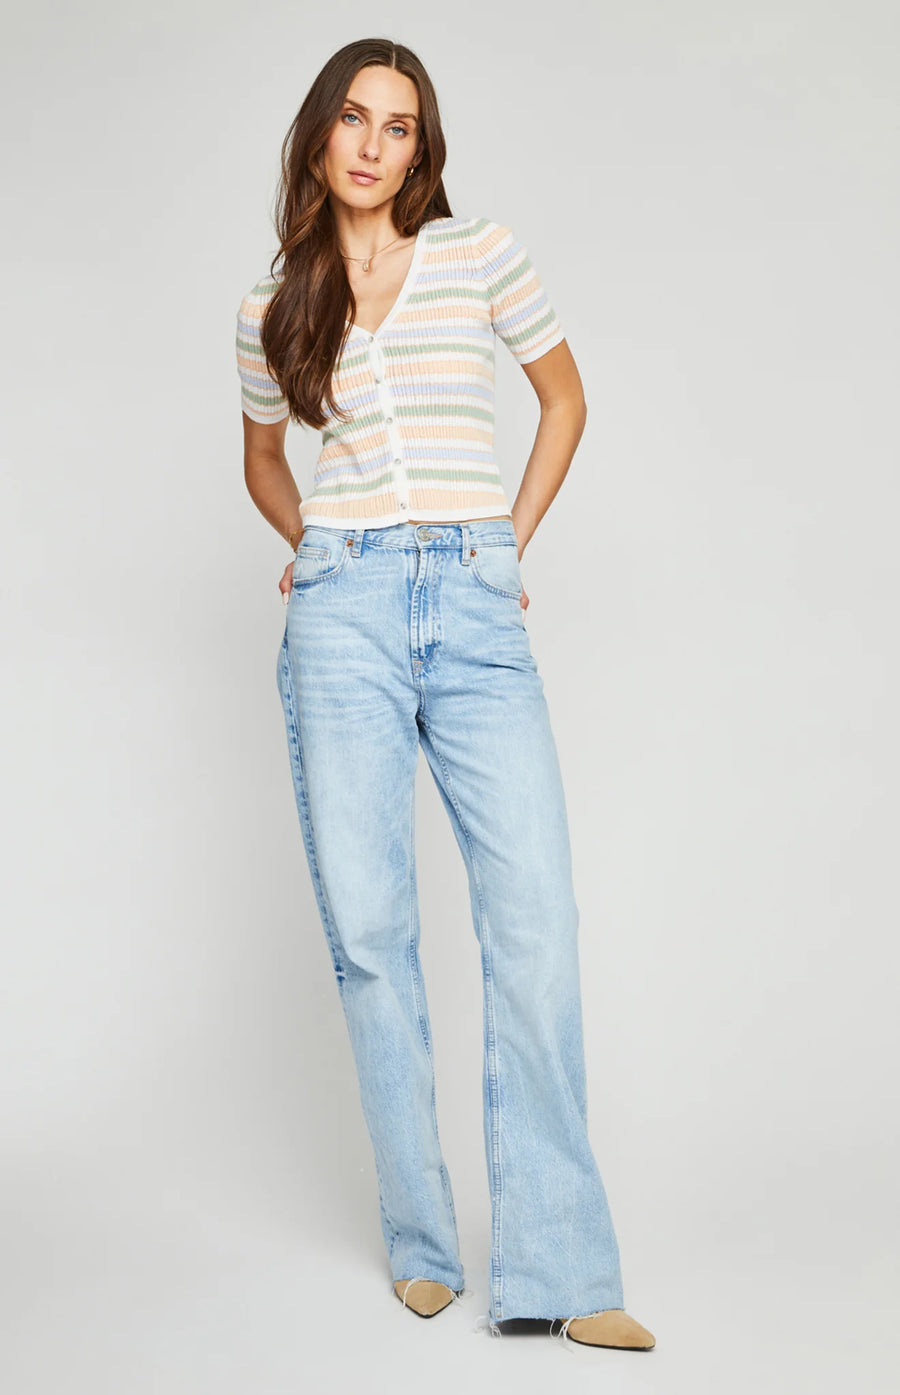 Gentle Fawn Addison Pullover - Sorbet Stripe Pink